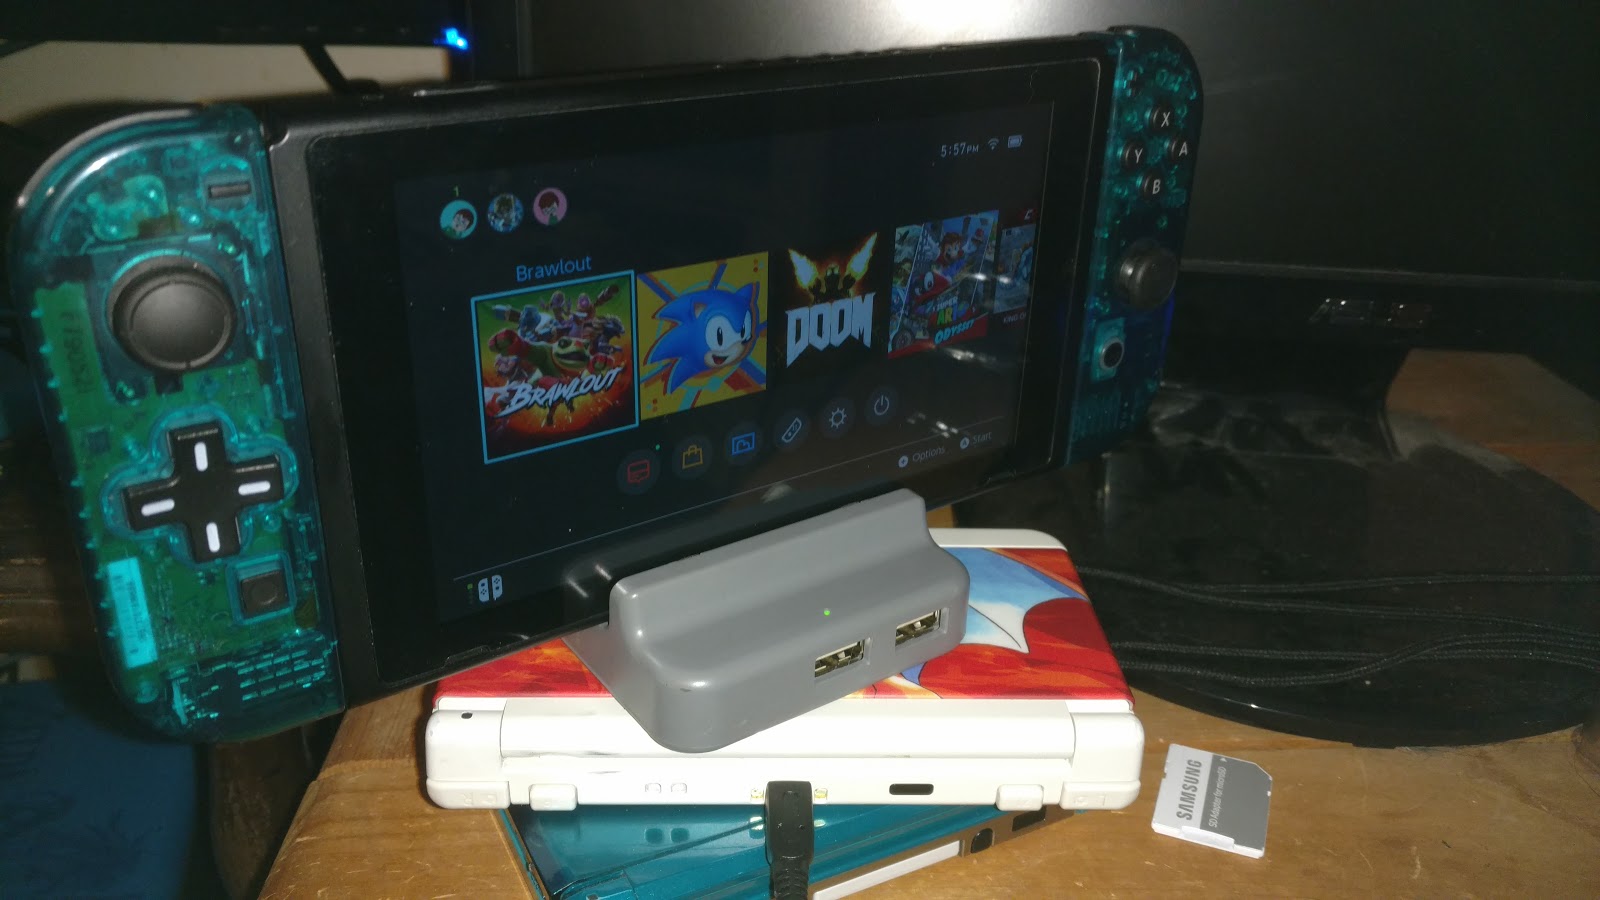 After $160,000 Crowdfunding Campaign, Mini Switch Dock Has A Rough Launch